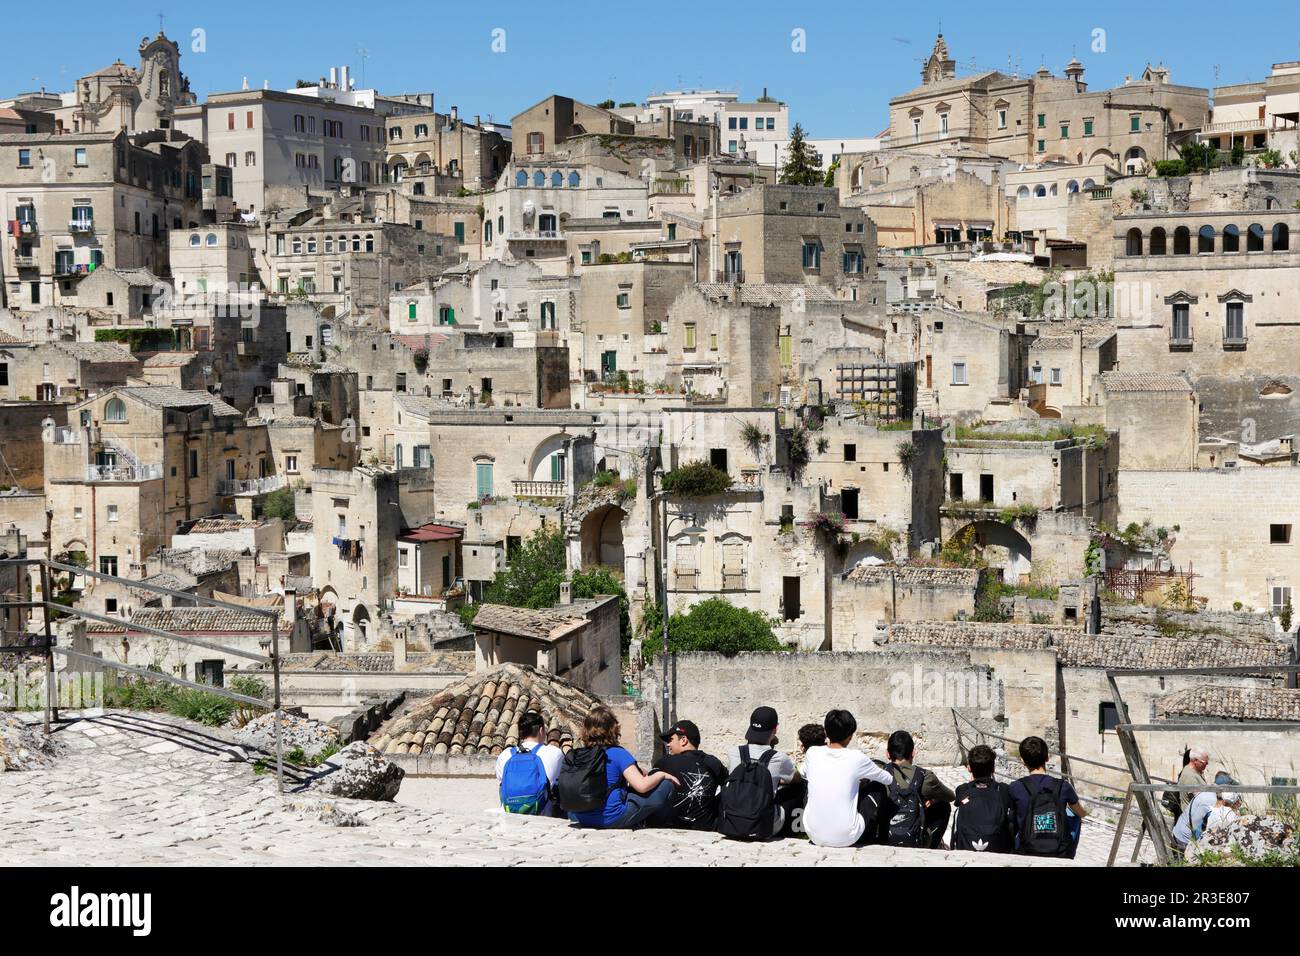 Moments in local daily life in the historic Sassi of Matera, Basilicata region of Italy. Stock Photo